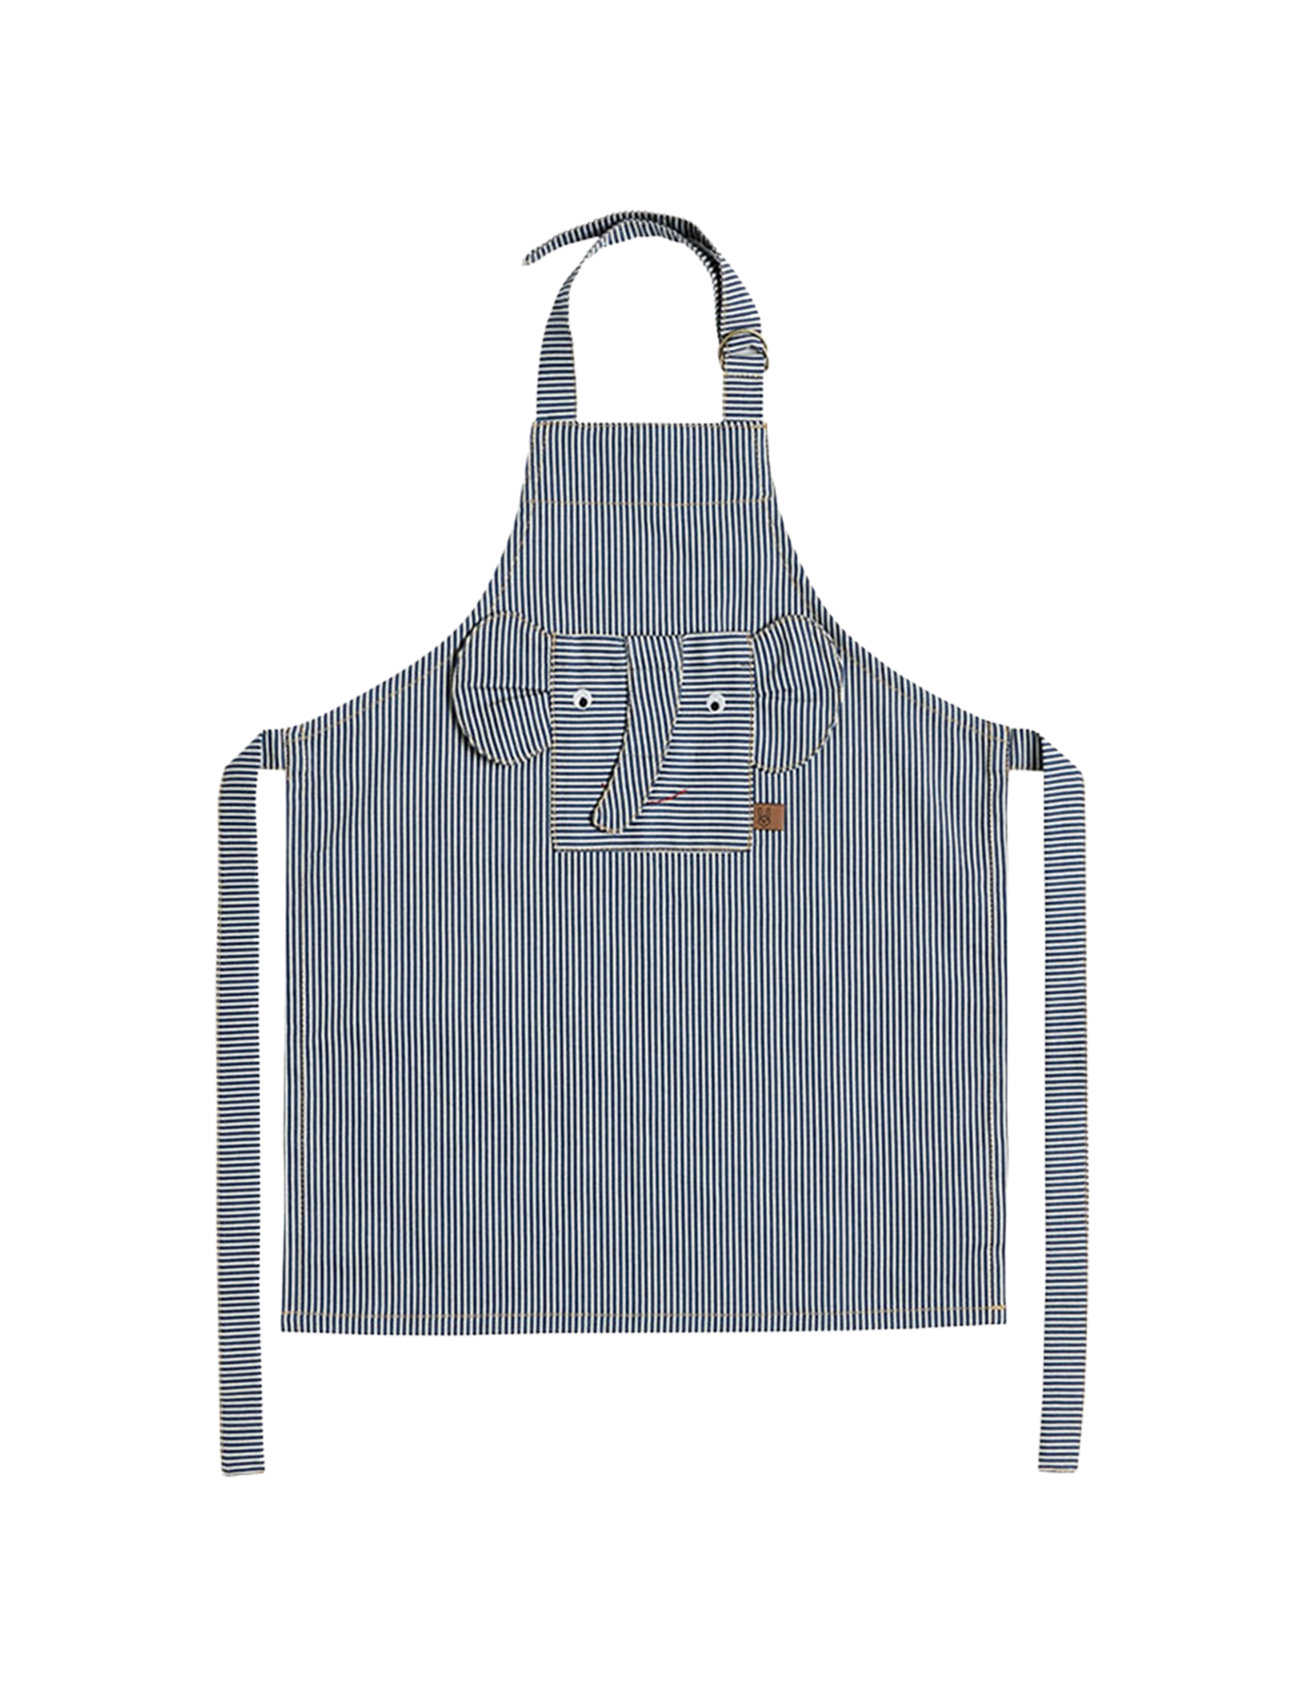 Striped Denim Elephant Apron Home Meal Time Baking & Cooking Aprons Blue OYOY MINI